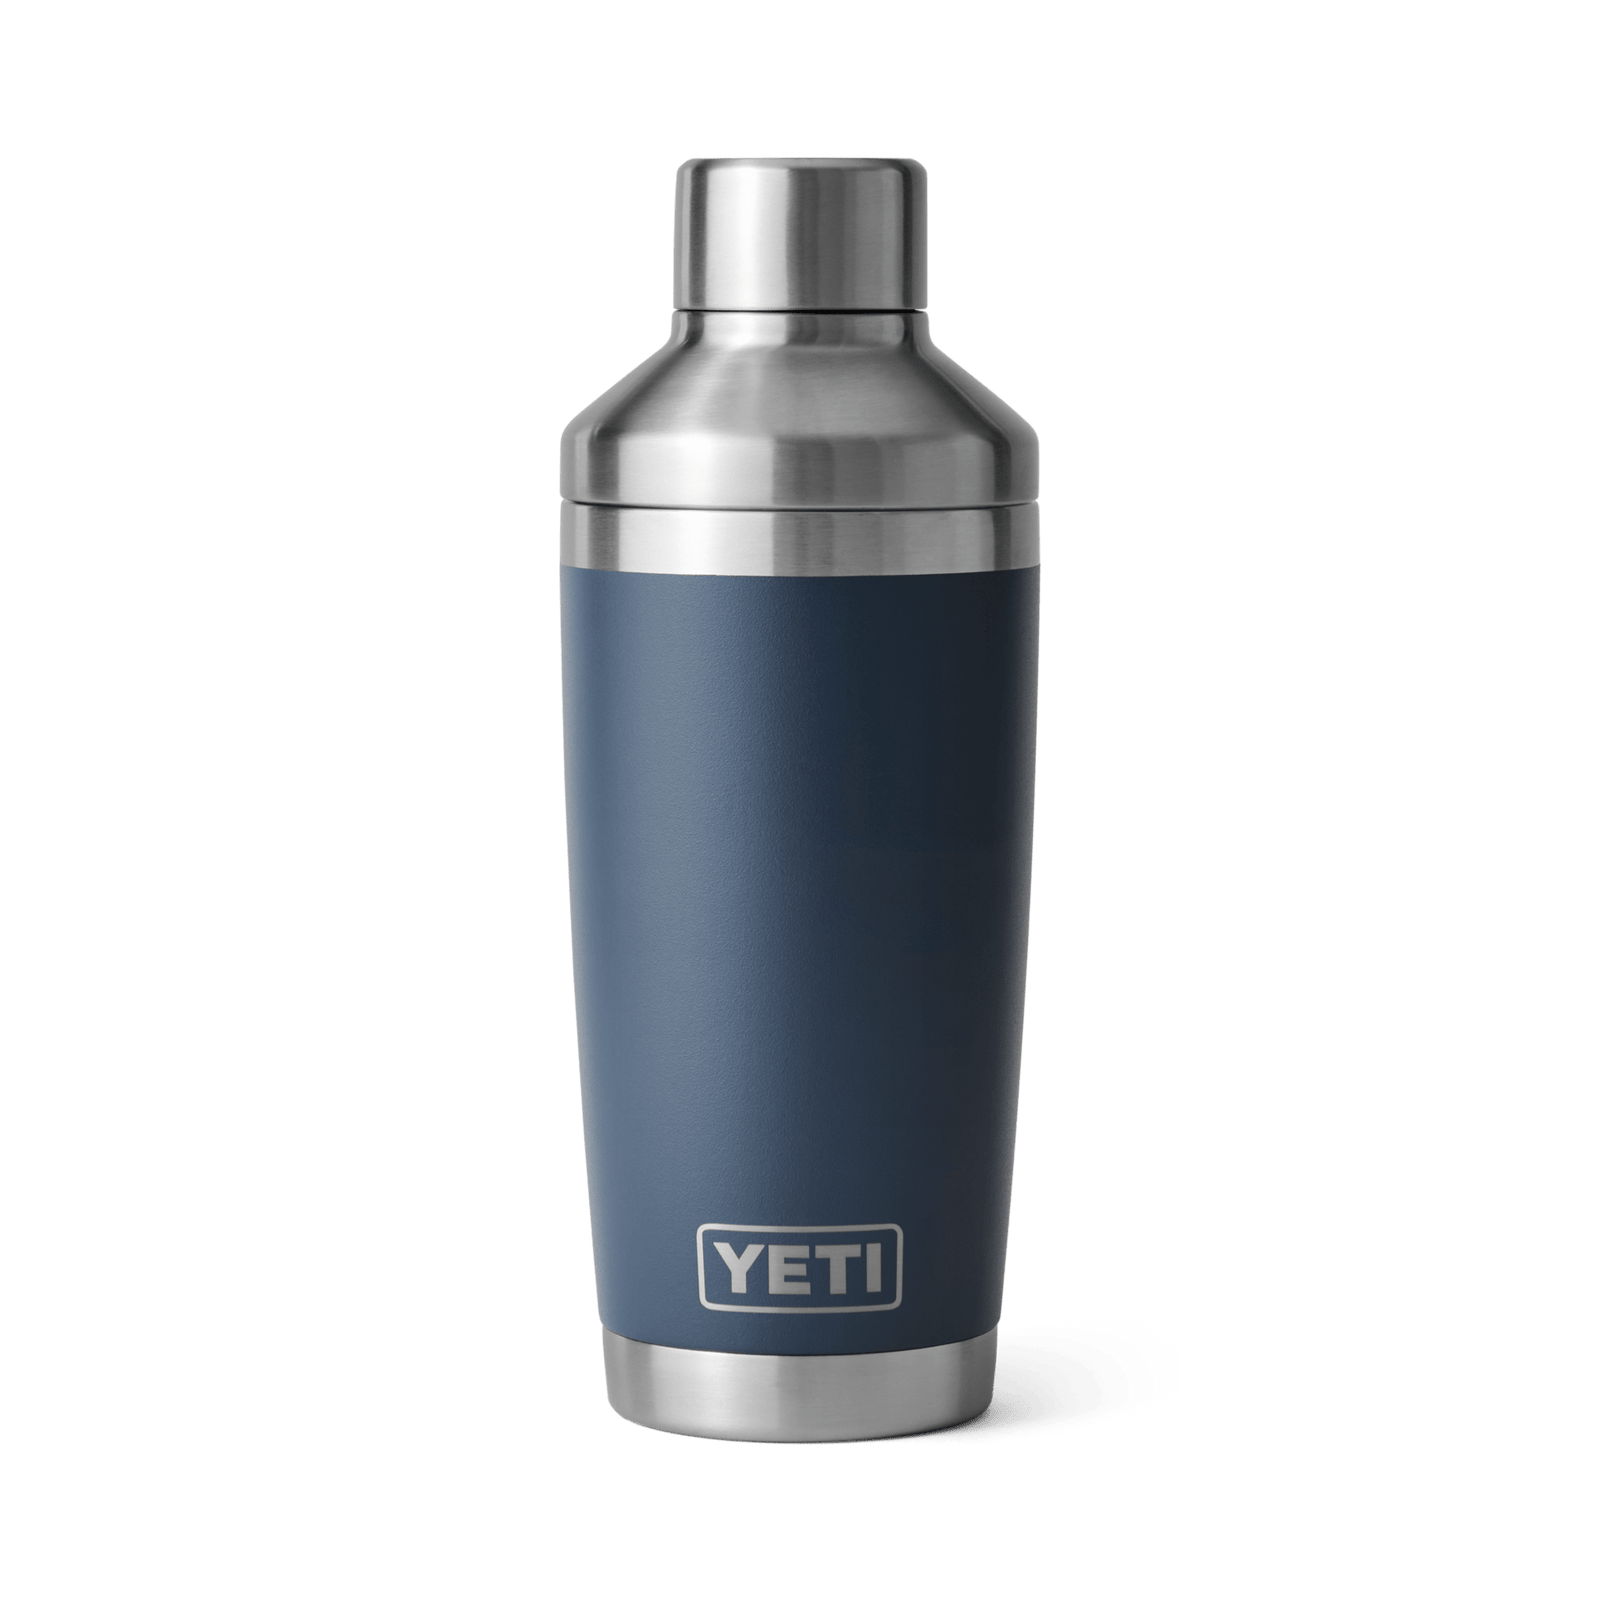 YETI Yonder 1L/34 oz Water Bottle with Yonder Tether Cap, Clear